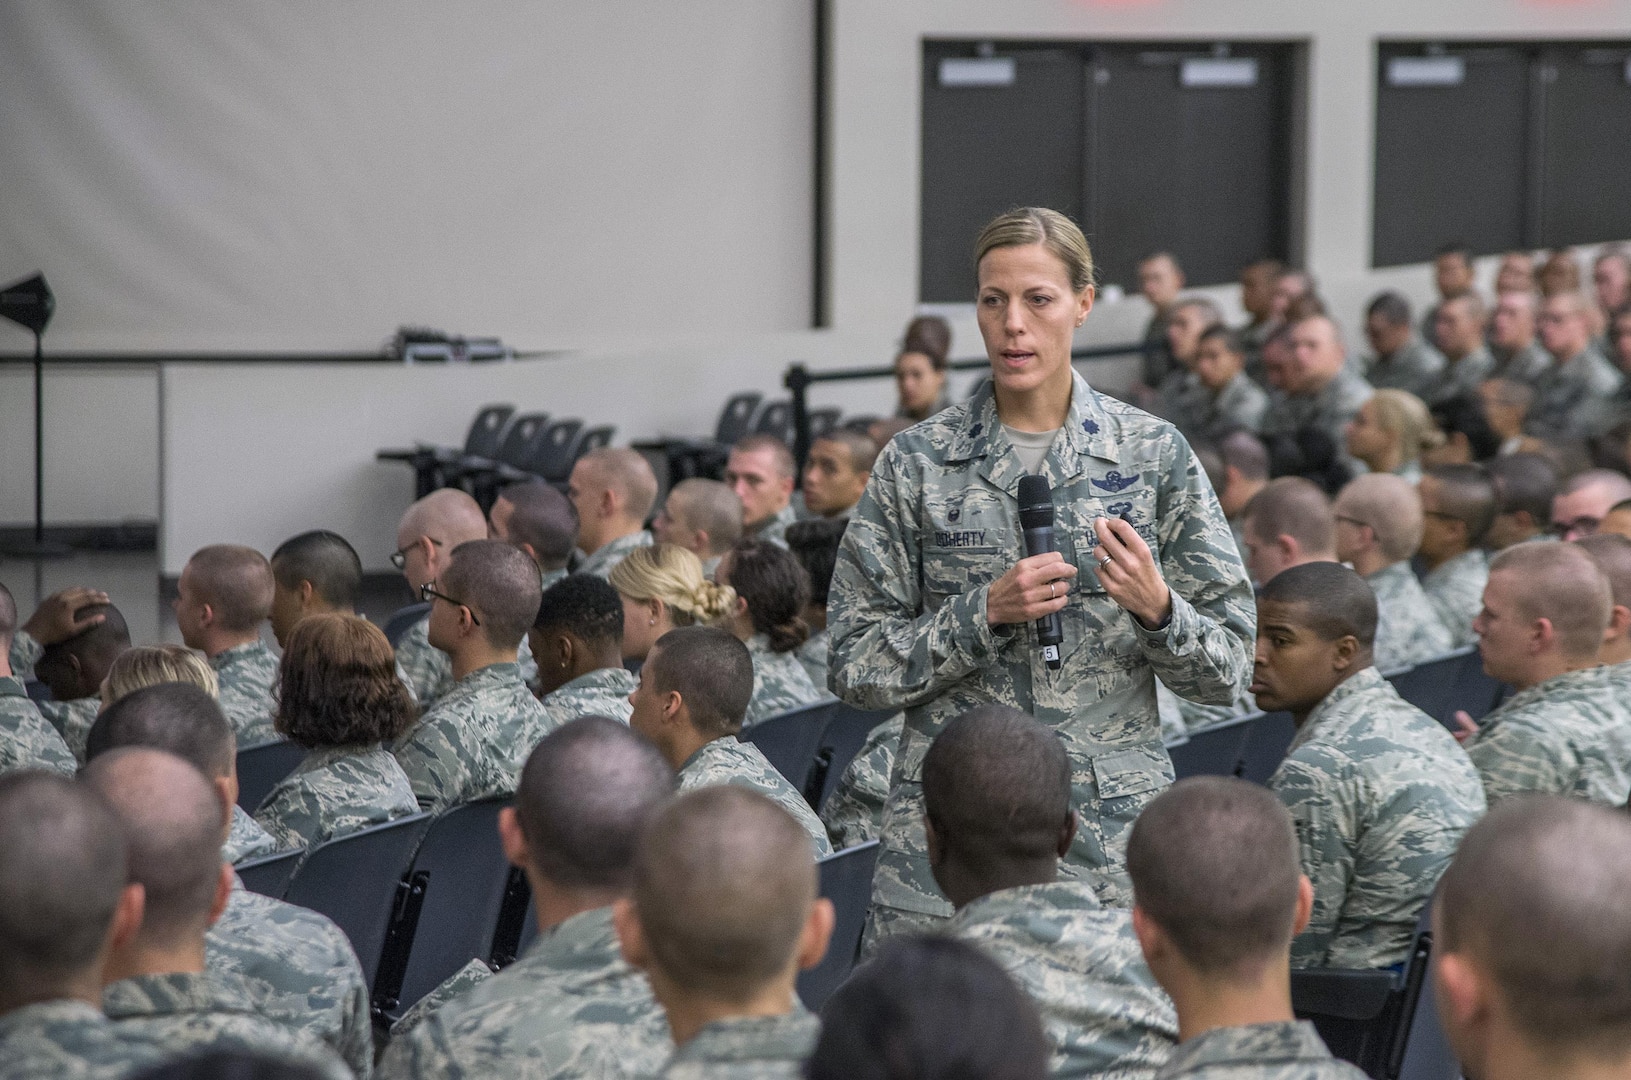 Lt. Col Meghan Doherty, 326th Training Squadron commander, addresses Airmen during Airmen’s Week April 3, 2016, at the Pfingston Reception Center at Joint Base San Antonio-Lackland, Texas. Airmen’s Week is a 31-hour, values-based course with a mission to “develop professional, resilient Airmen, inspired by our heritage, committed to the Air Force core values, and motivated to deliver airpower for America.”